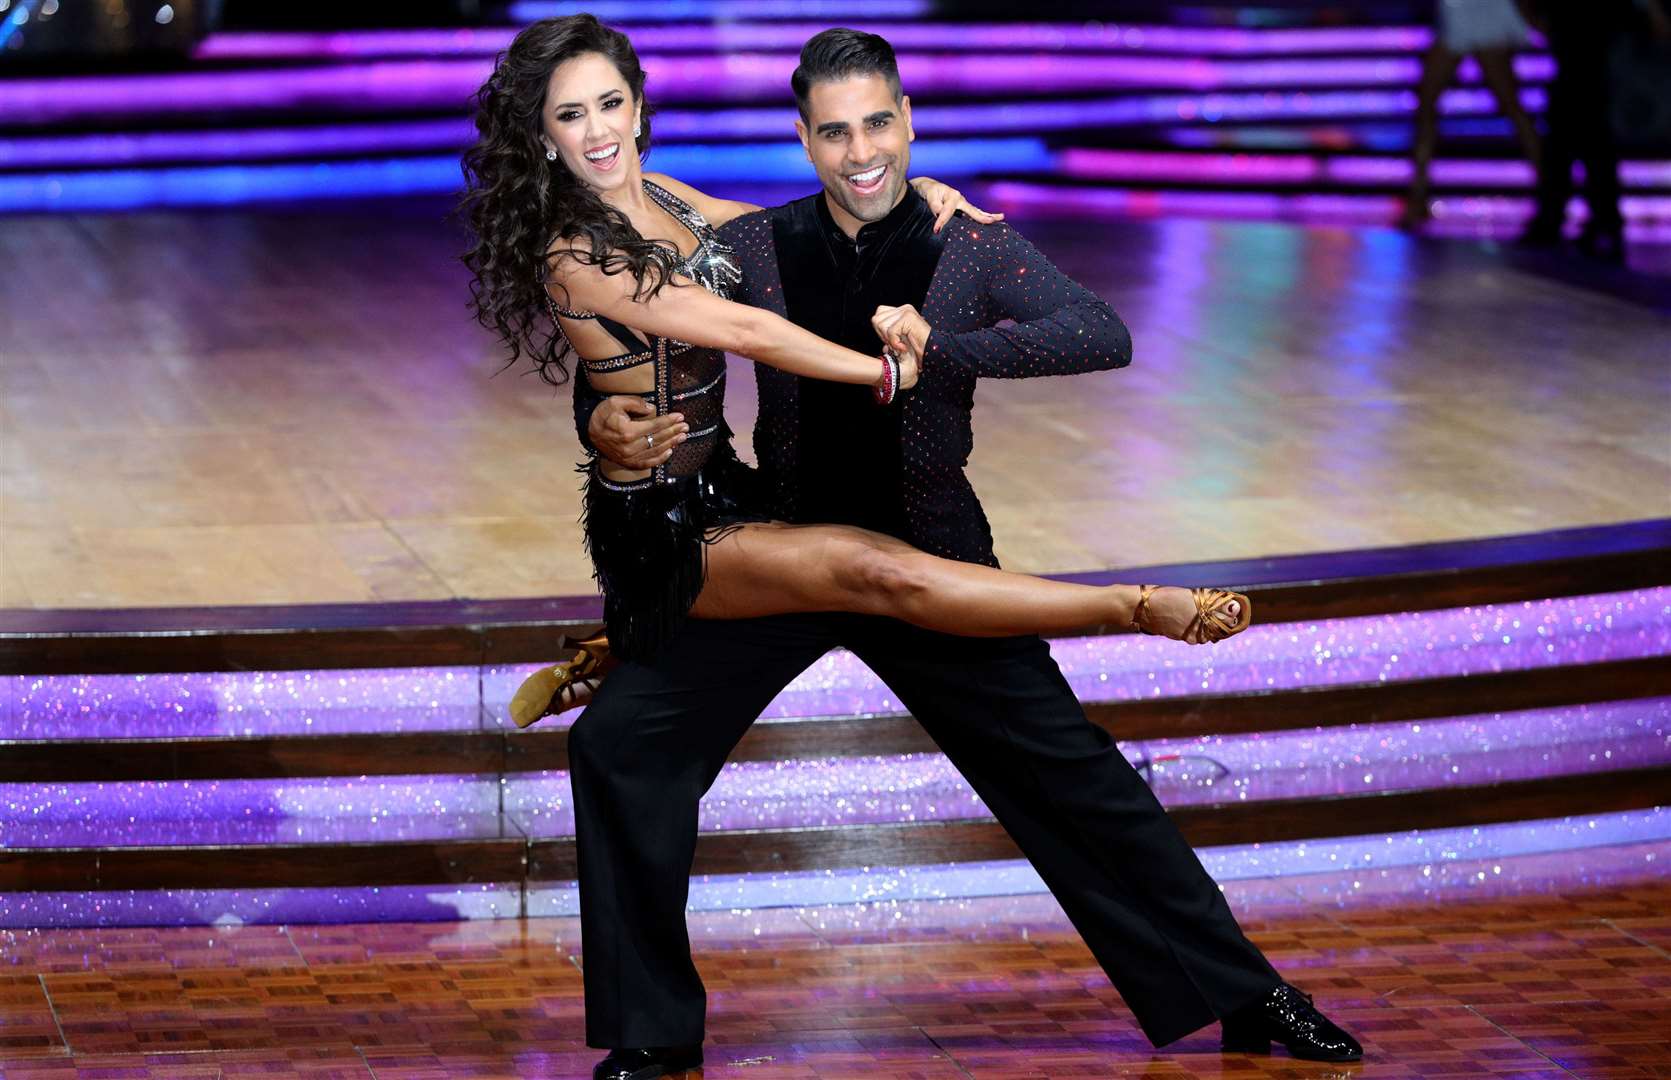 Dr Ranj Singh and Janette Manrara on the Strictly Come Dancing Tour Picture:Aaron Chown